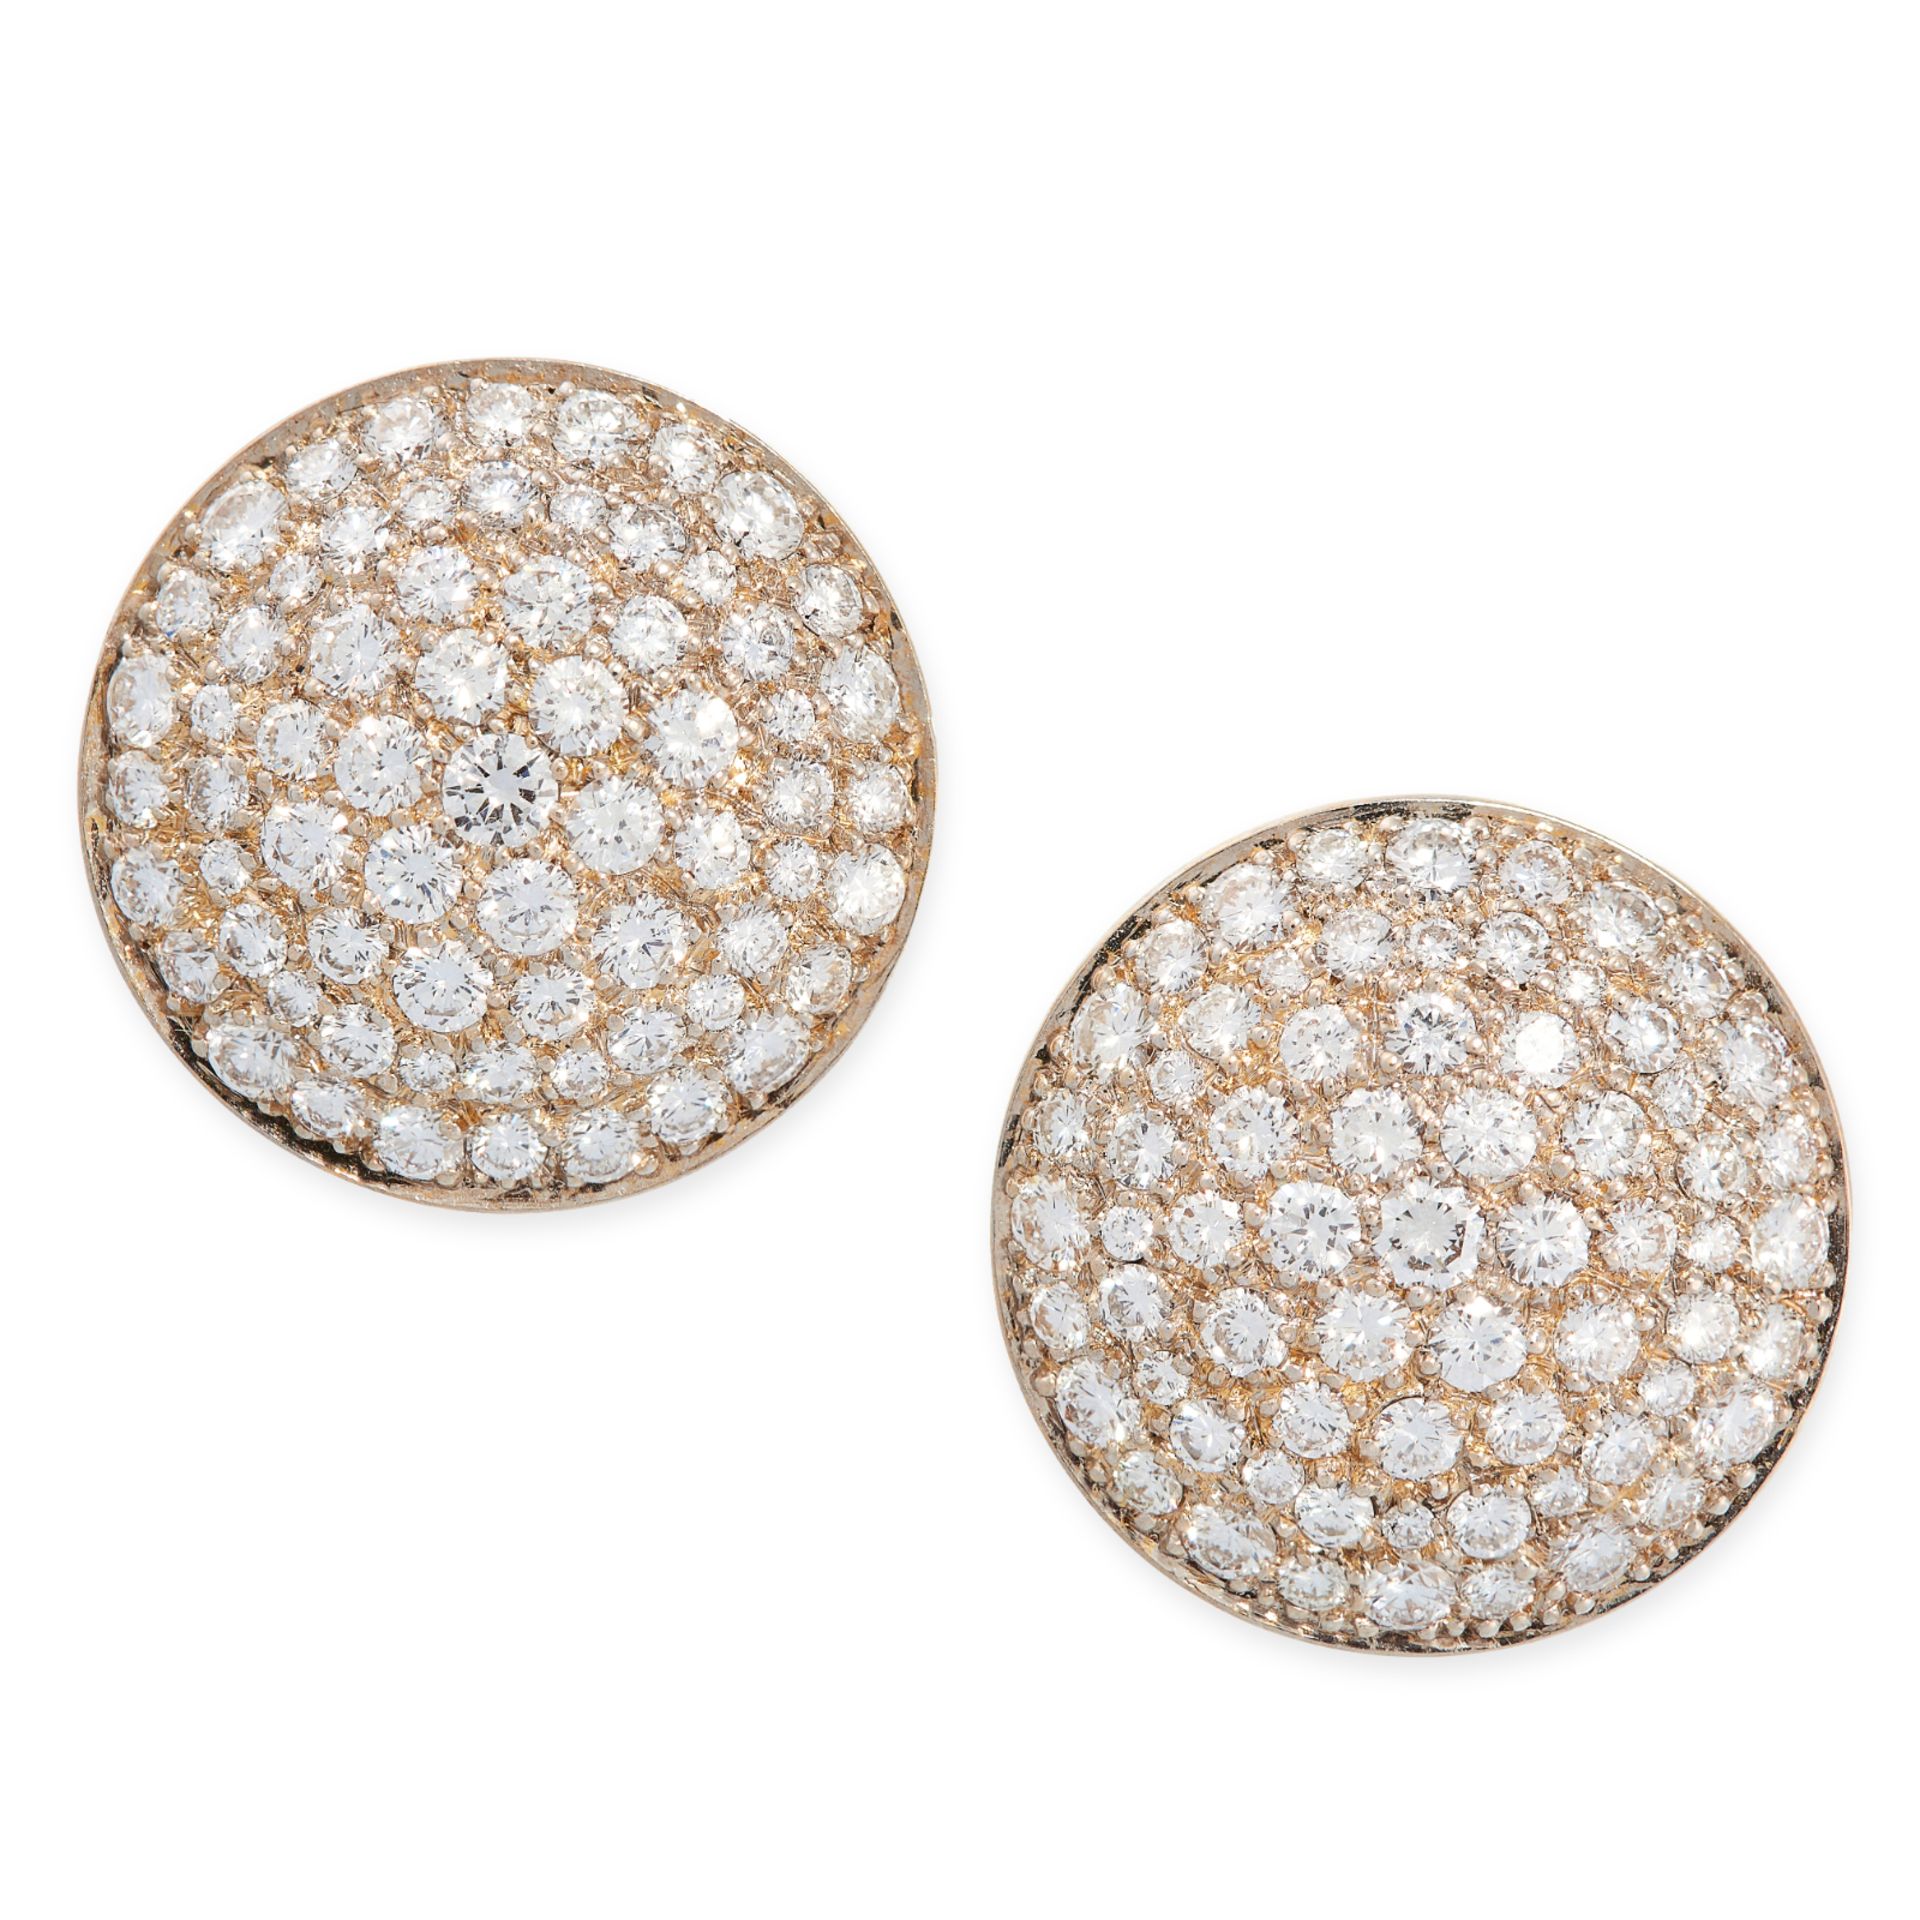 A PAIR OF DIAMOND CLIP EARRINGS in 18ct yellow gold, each of circular design, set allover with round